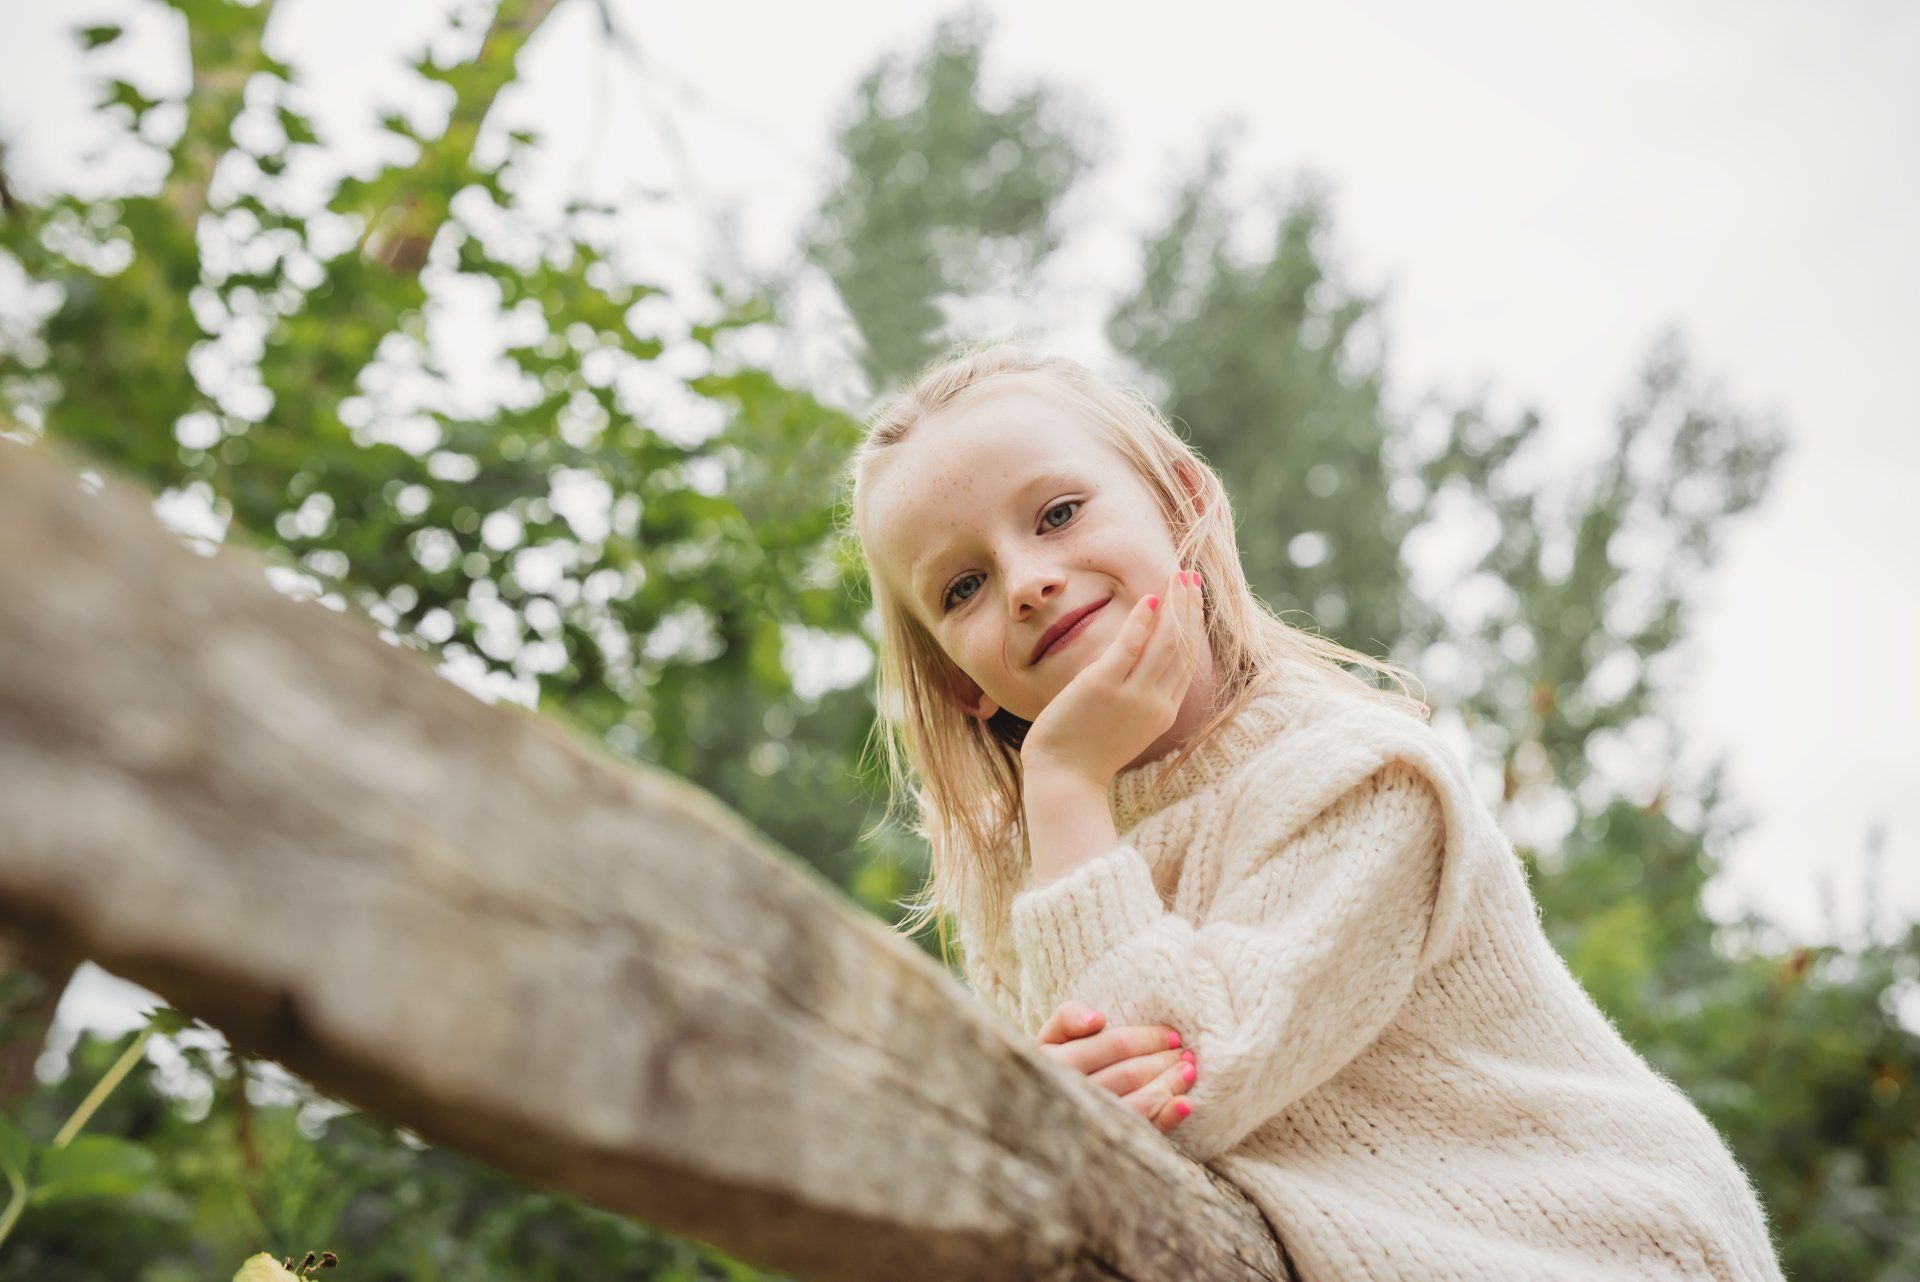 young girl leaning against a wooden fence